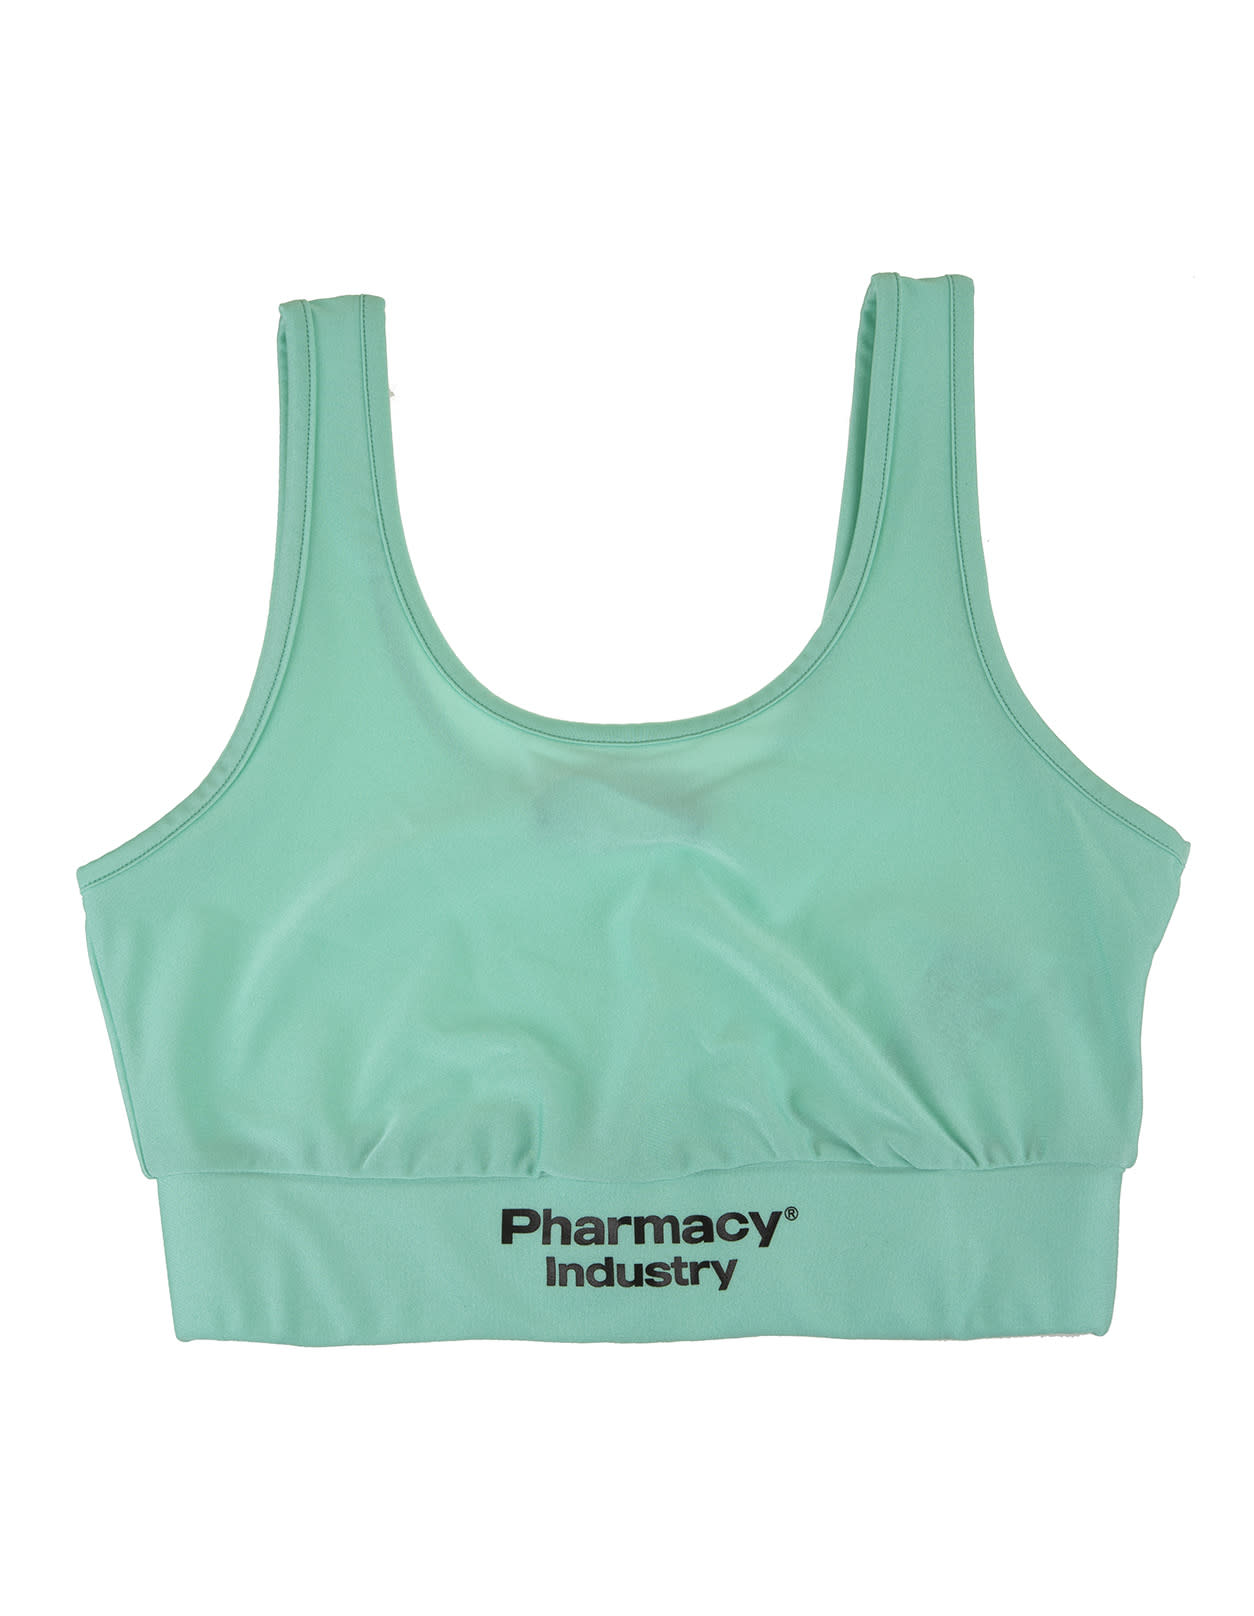 Pharmacy Industry Mint Green Sports Crop Top With Logo